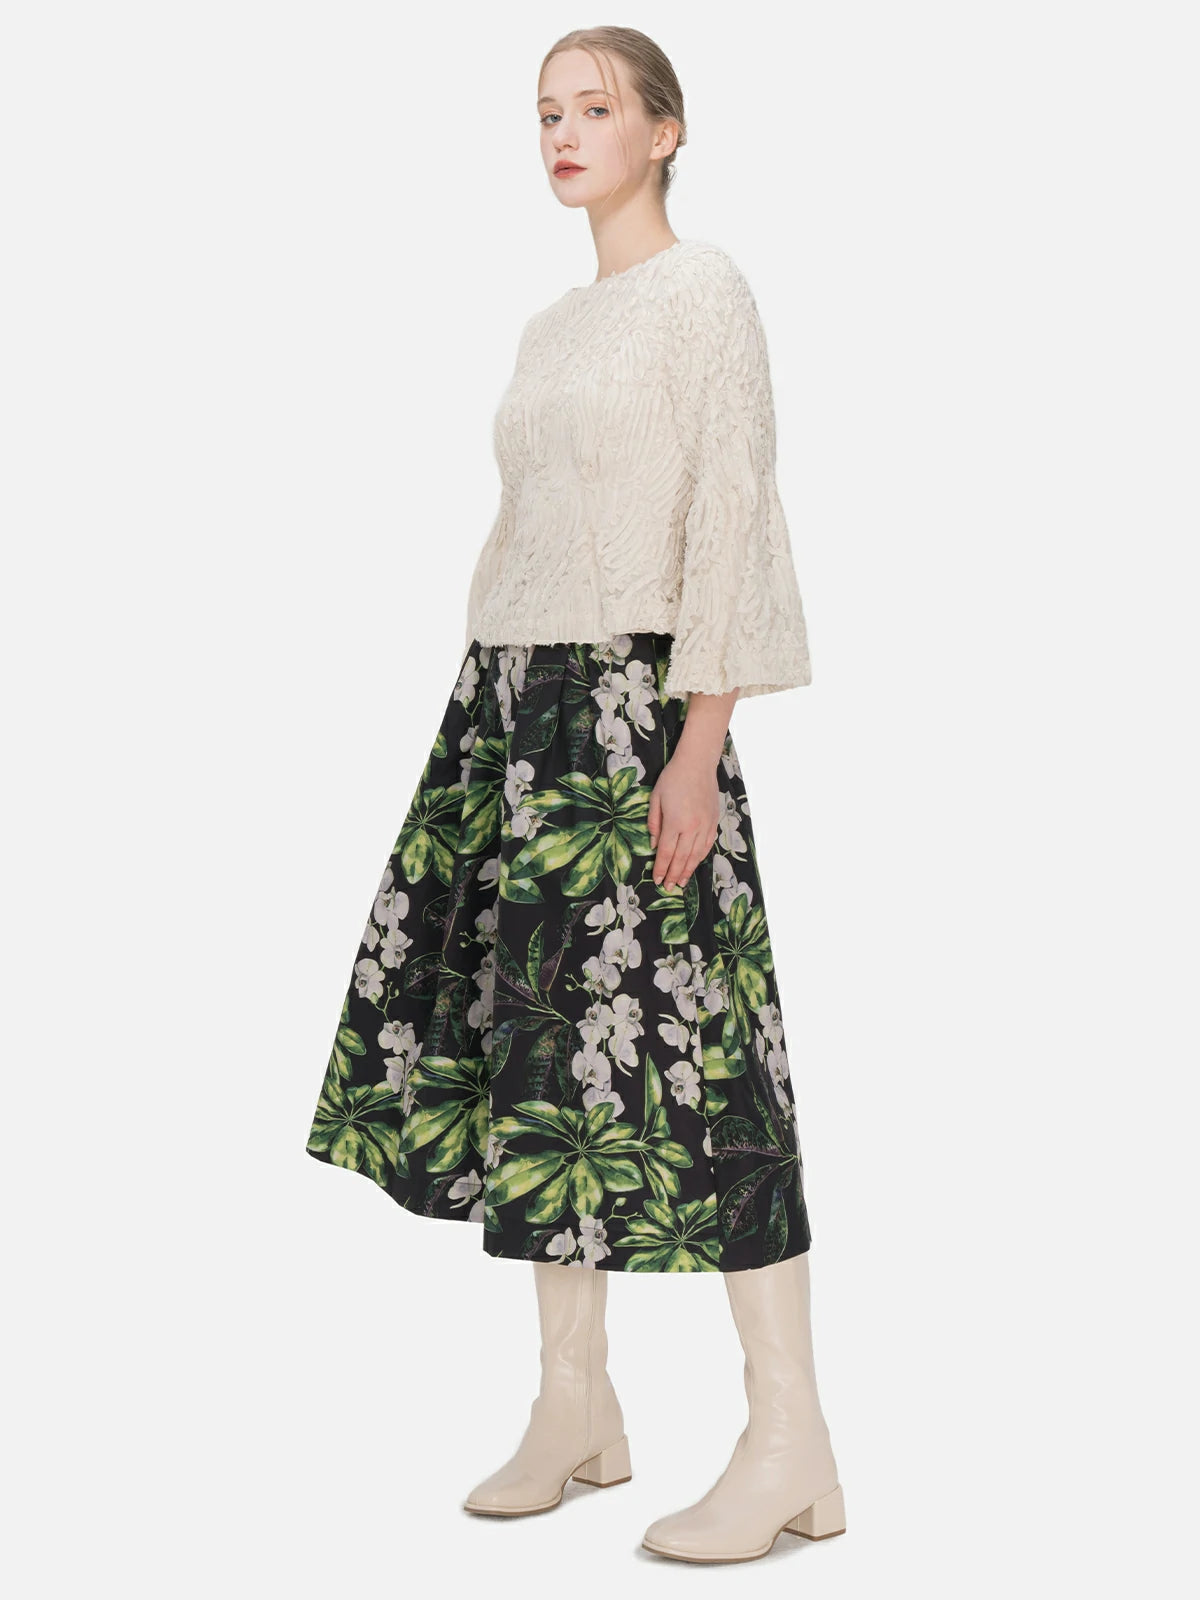 Youthful and versatile A-line midi skirt with a high-waisted silhouette, showcasing a vibrant color-blocked floral pattern and dynamic layered pleats for various occasions.